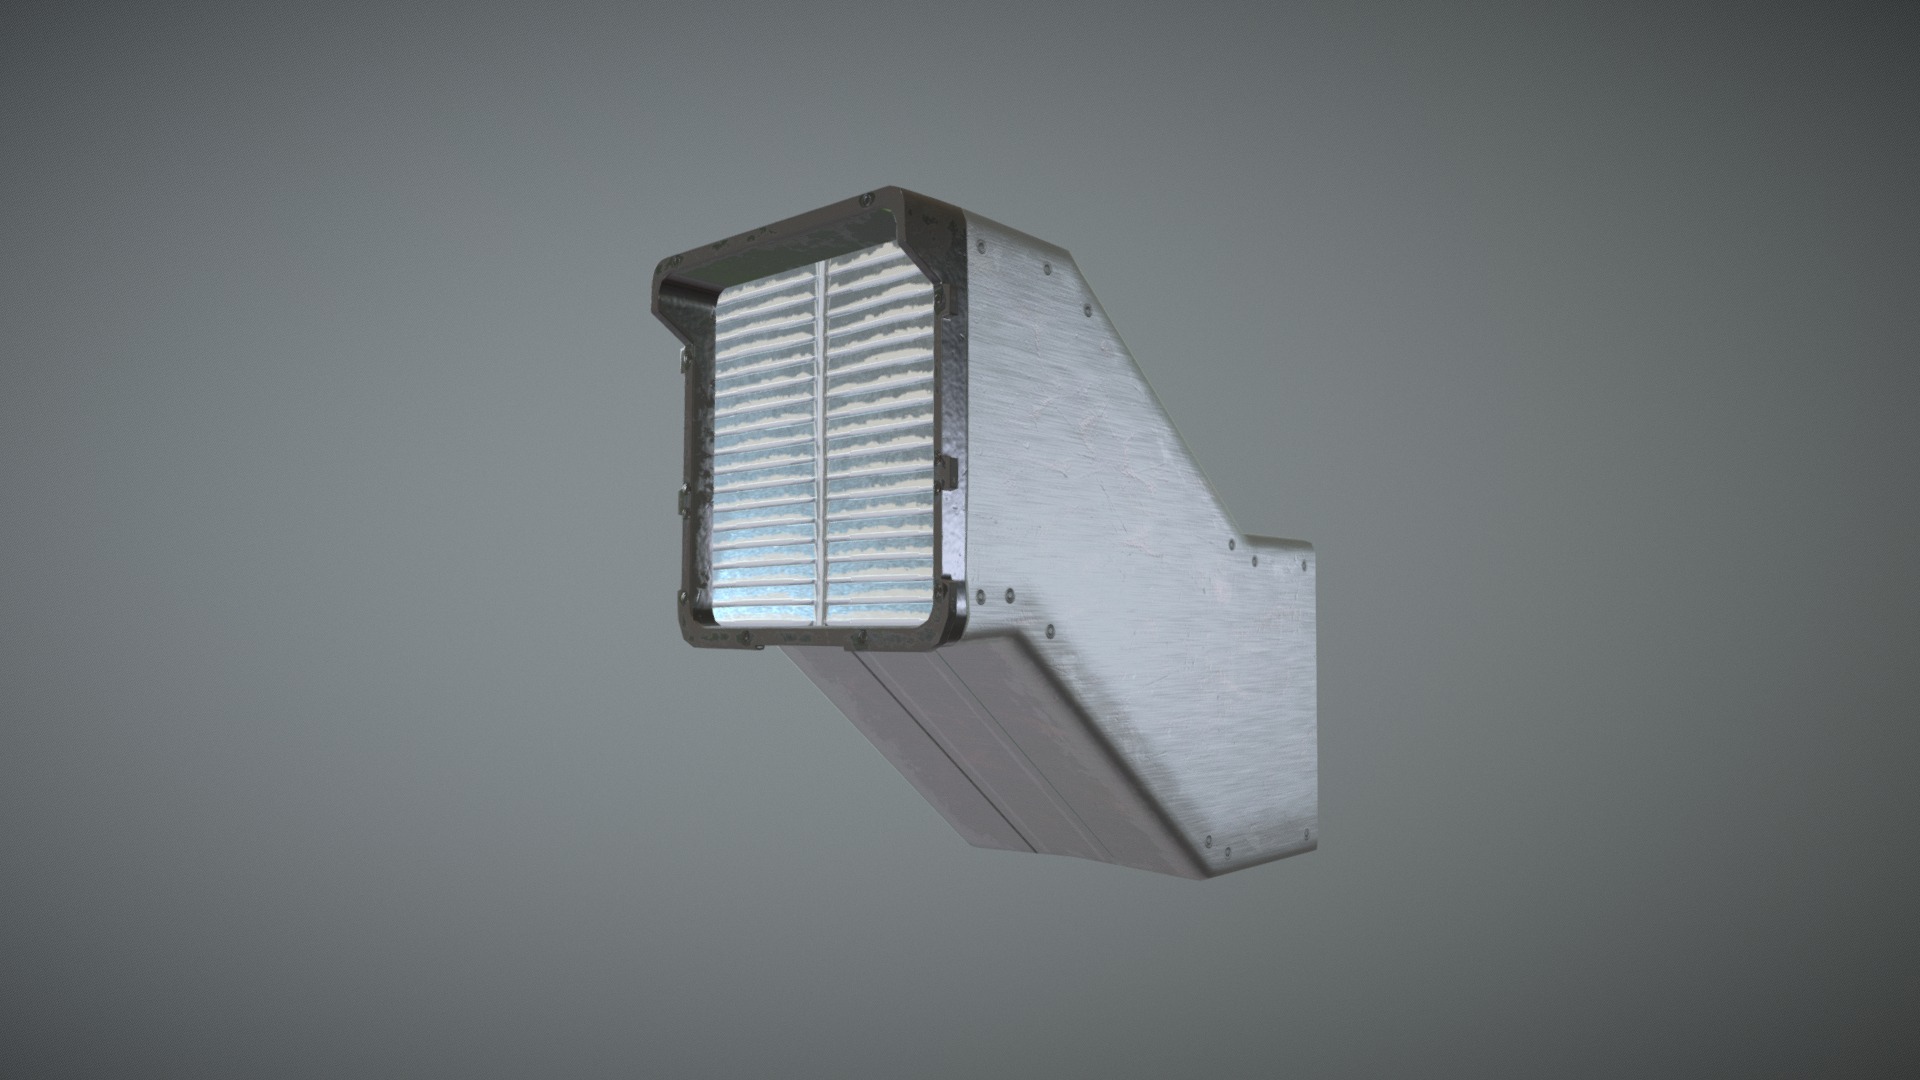 Air Duct Low Poly
Model - Maya
Bake and Texture - Susbtance Painter - Low Poly Air Duct - 3D model by uditarora 3d model